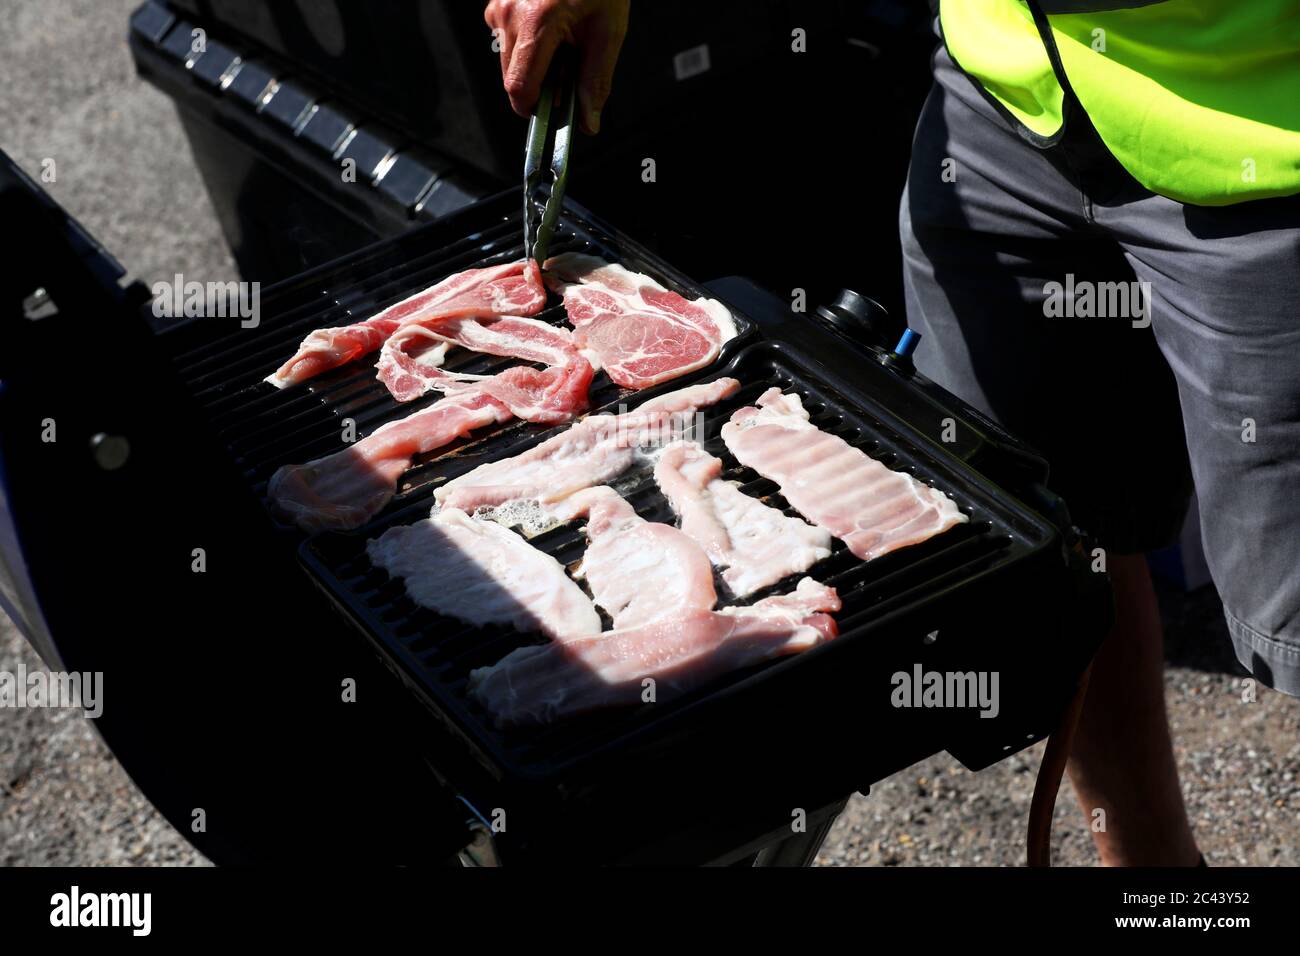 Bacon being cooked on a portable stove in Brighton, East Sussex, UK. Stock Photo